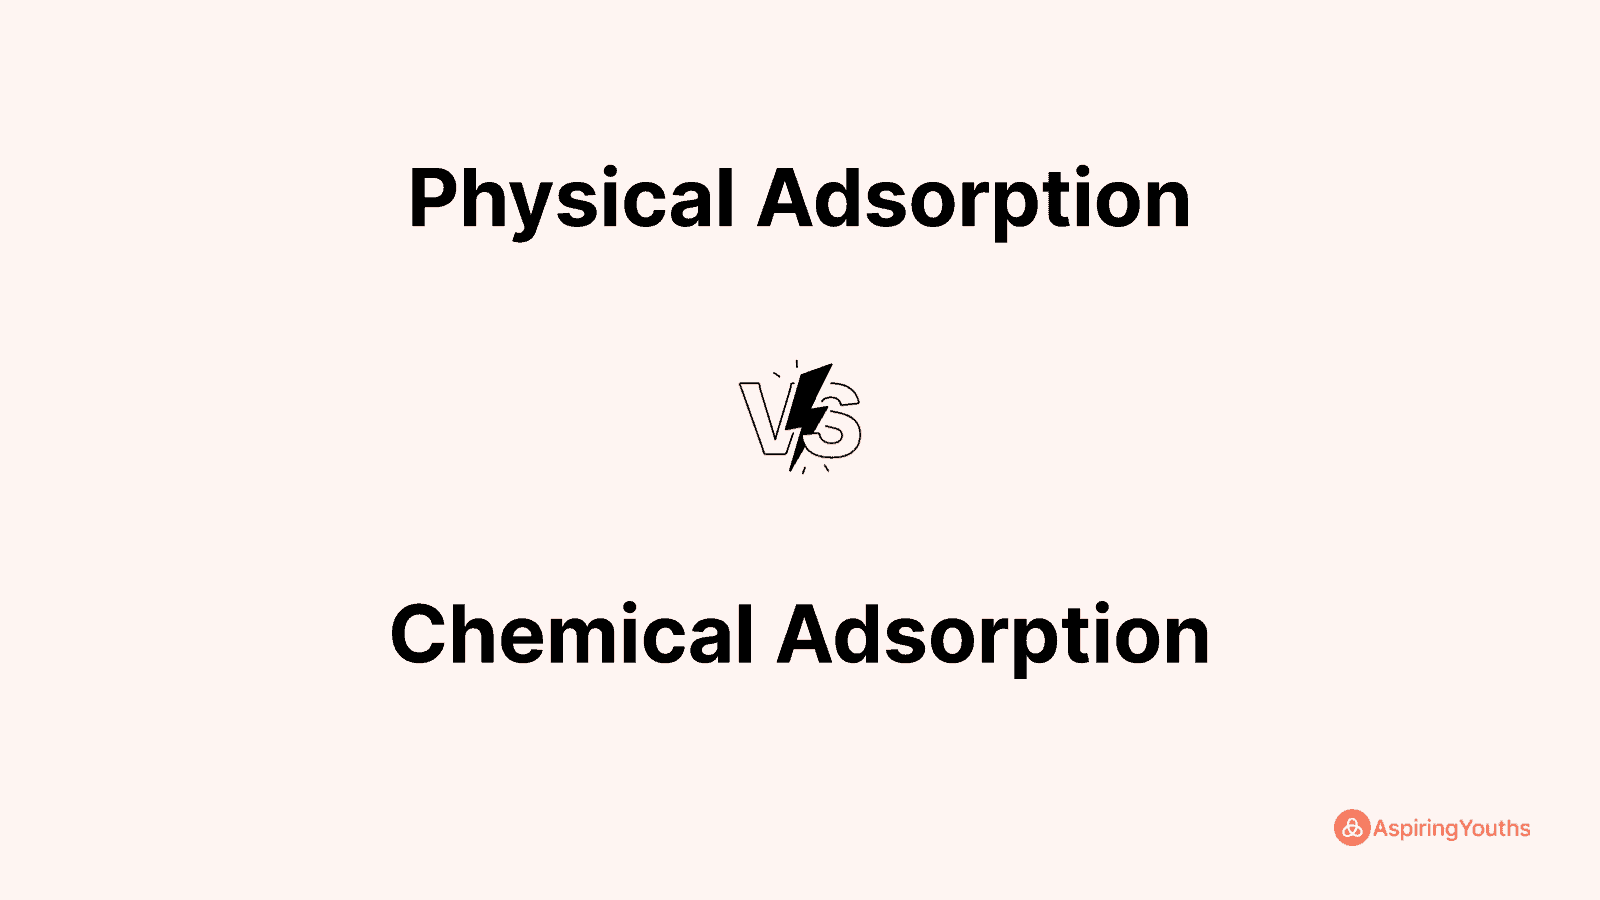 Physical Adsorption vs Chemical Adsorption